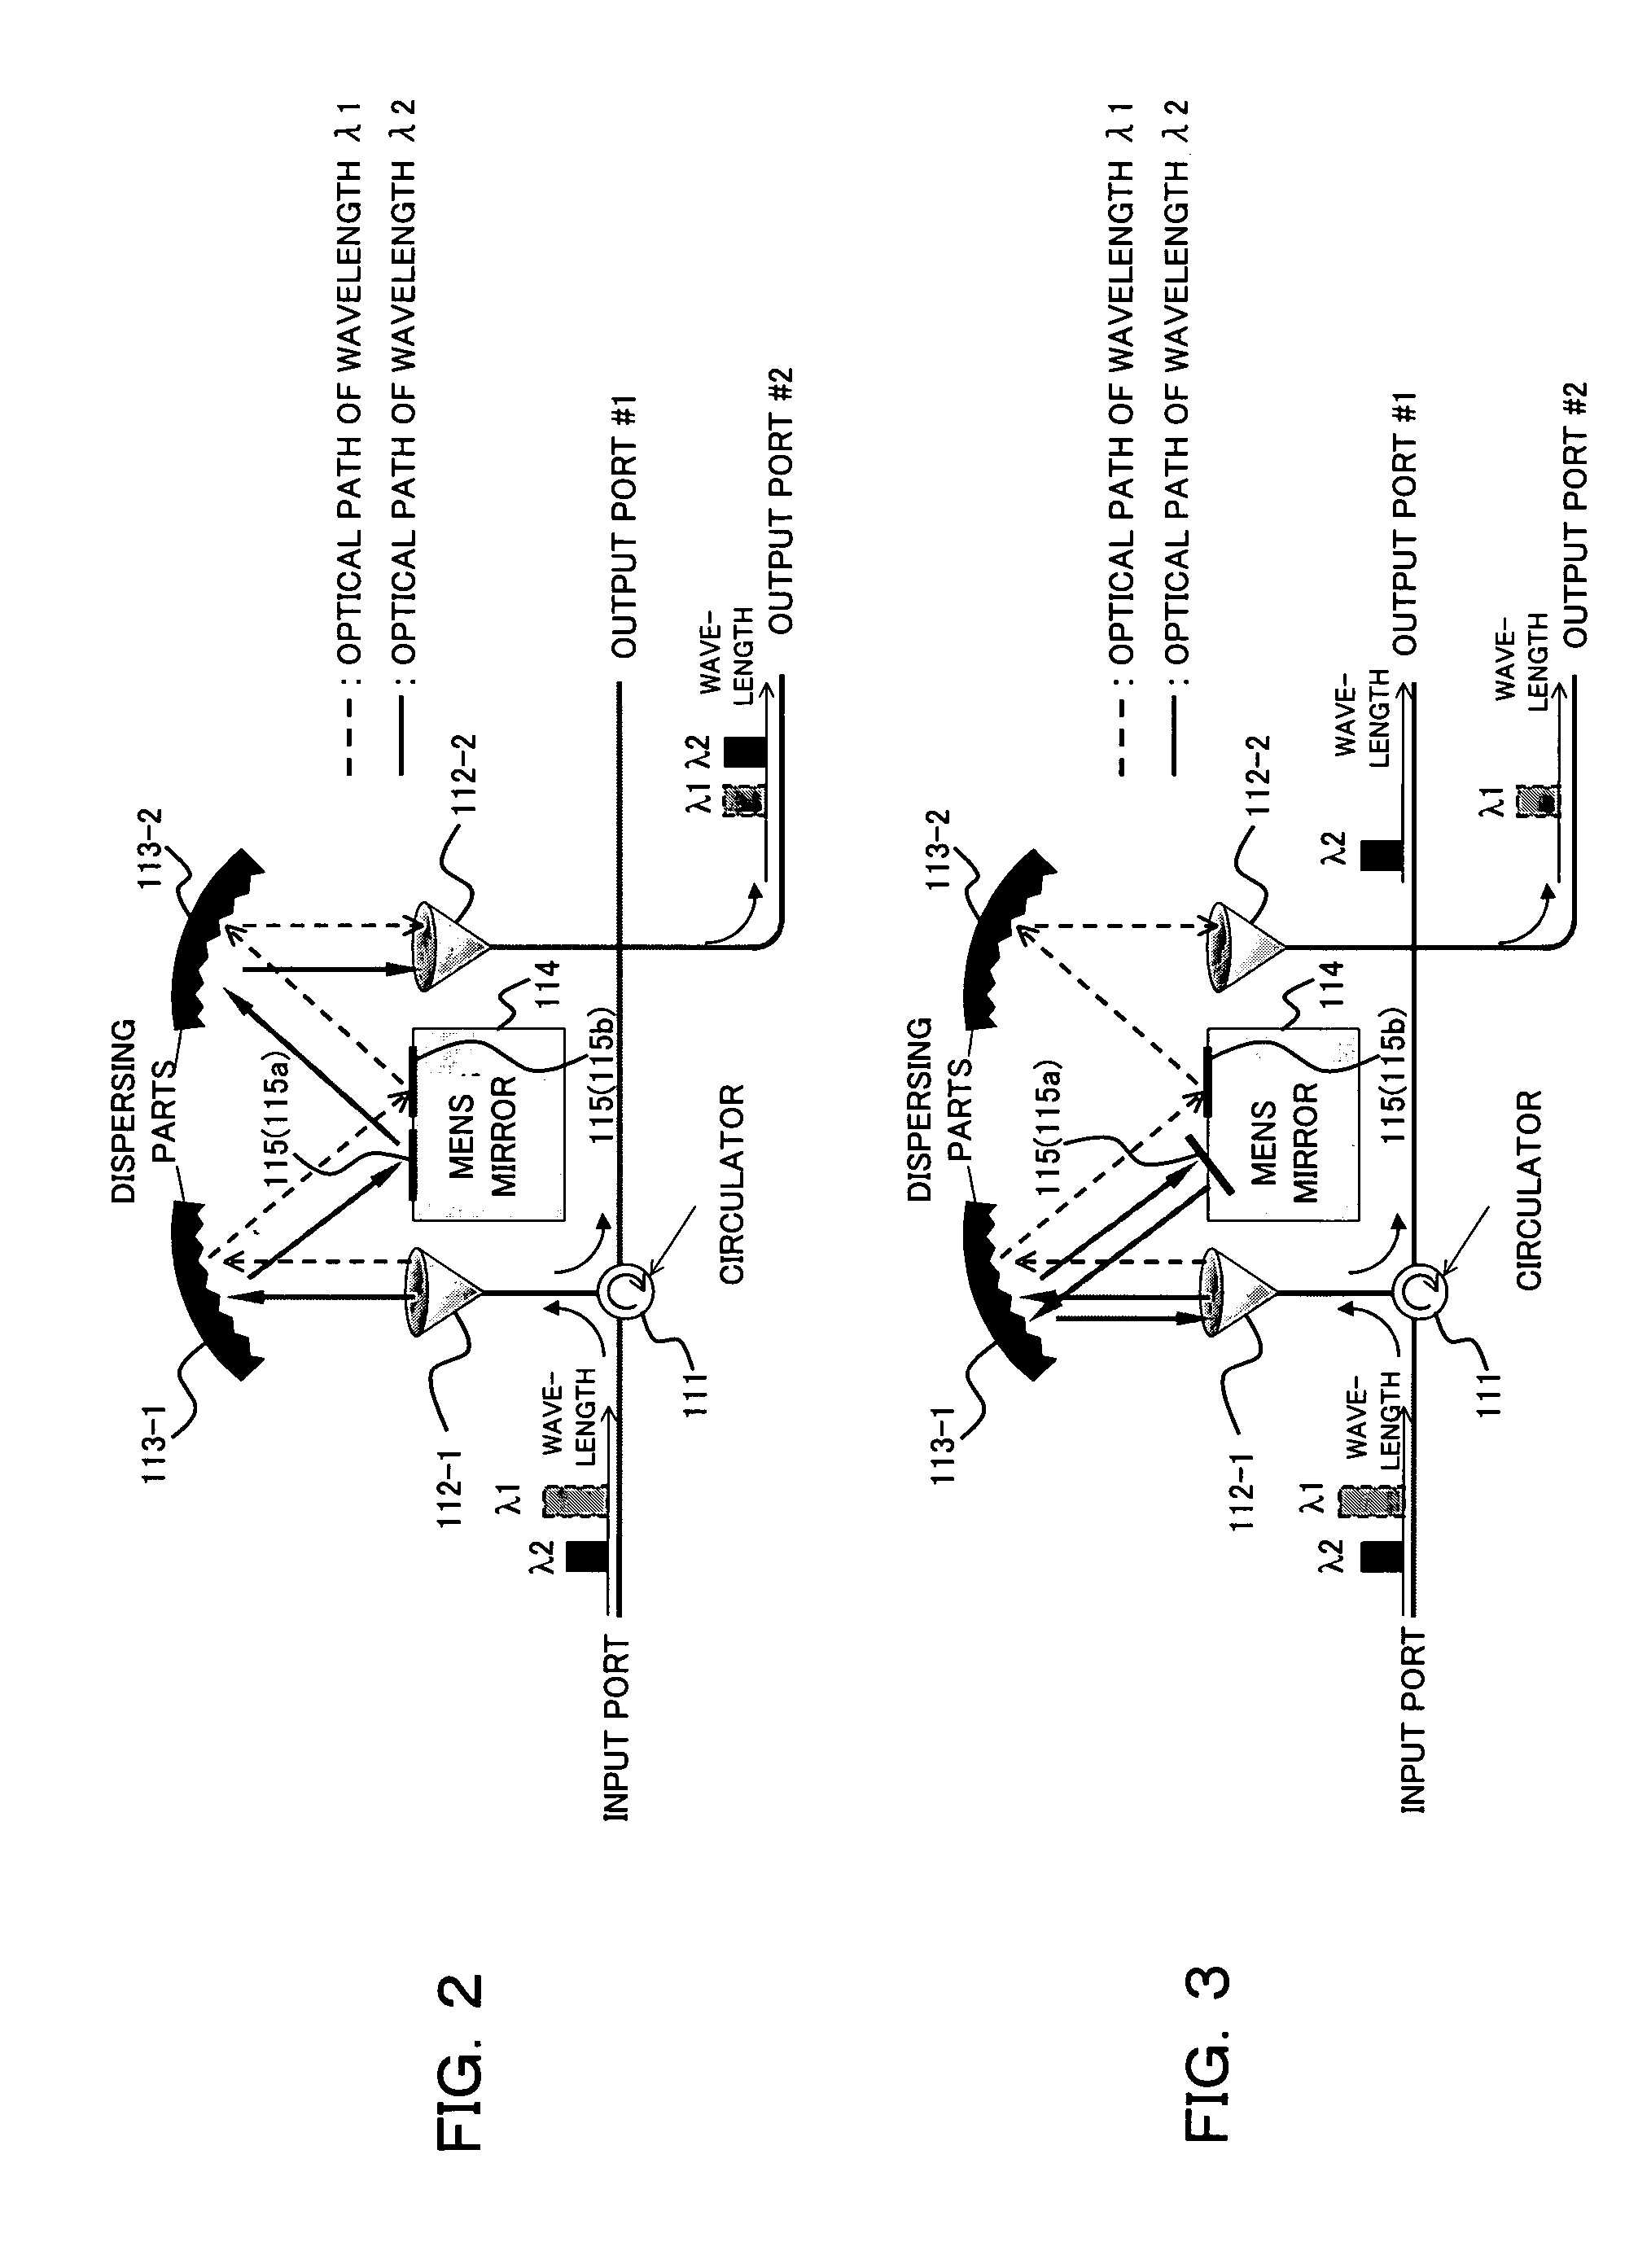 Optical transmitting apparatus, method of increasing the number of paths of the apparatus, and optical switch module for increasing the number of paths of the apparatus